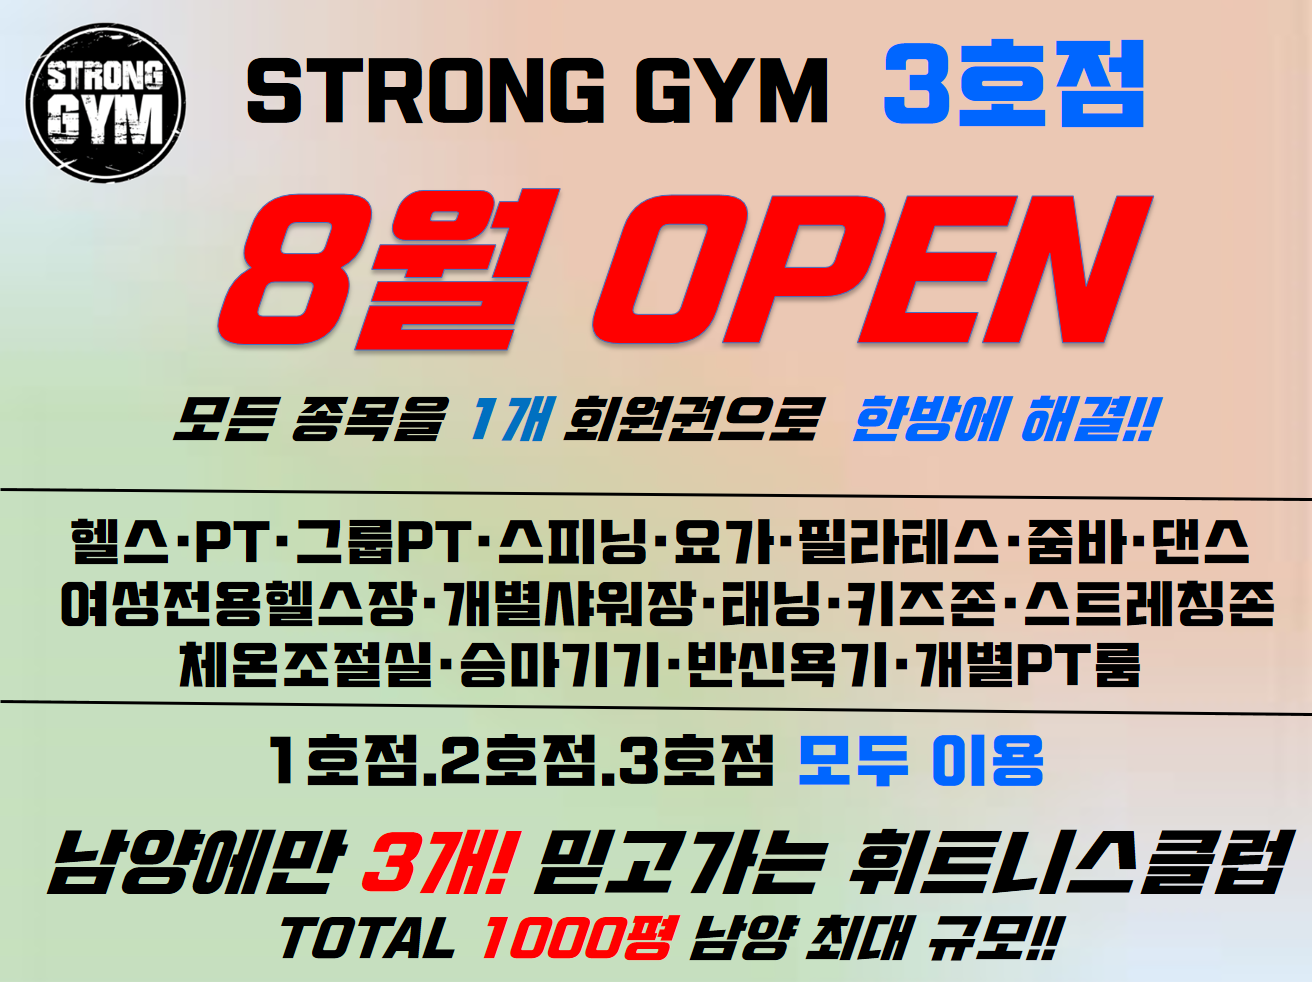 http://stronggym.itpage.kr/user/s/stronggym/editor/1806/f99f8f0766ec1774af5acc8f6e5a0295_1530003422_6435.png 이미지크게보기